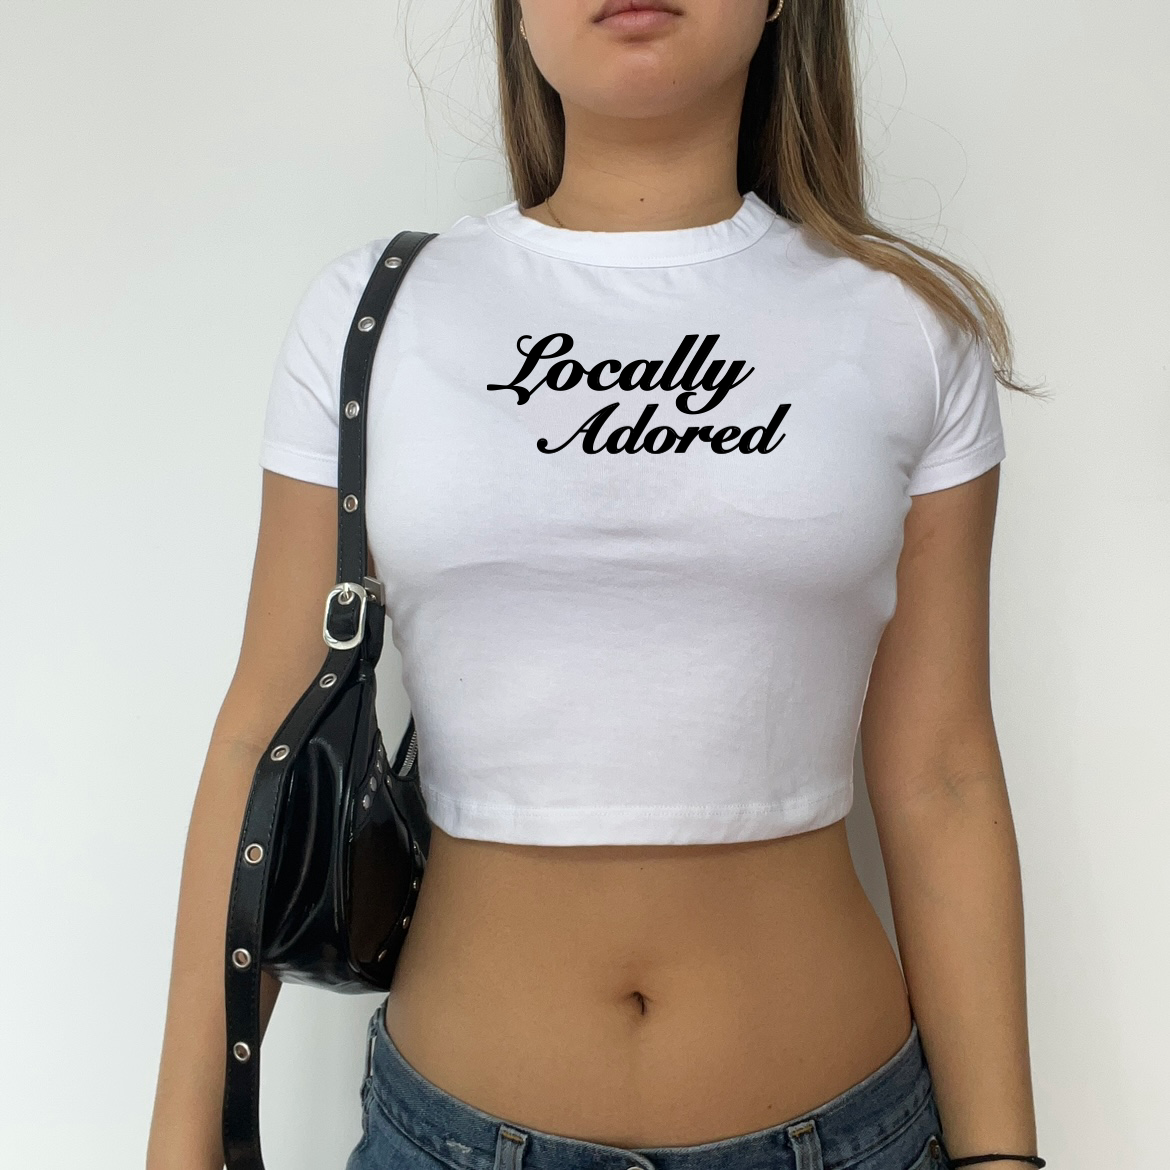 Locally Adored Baby Tee